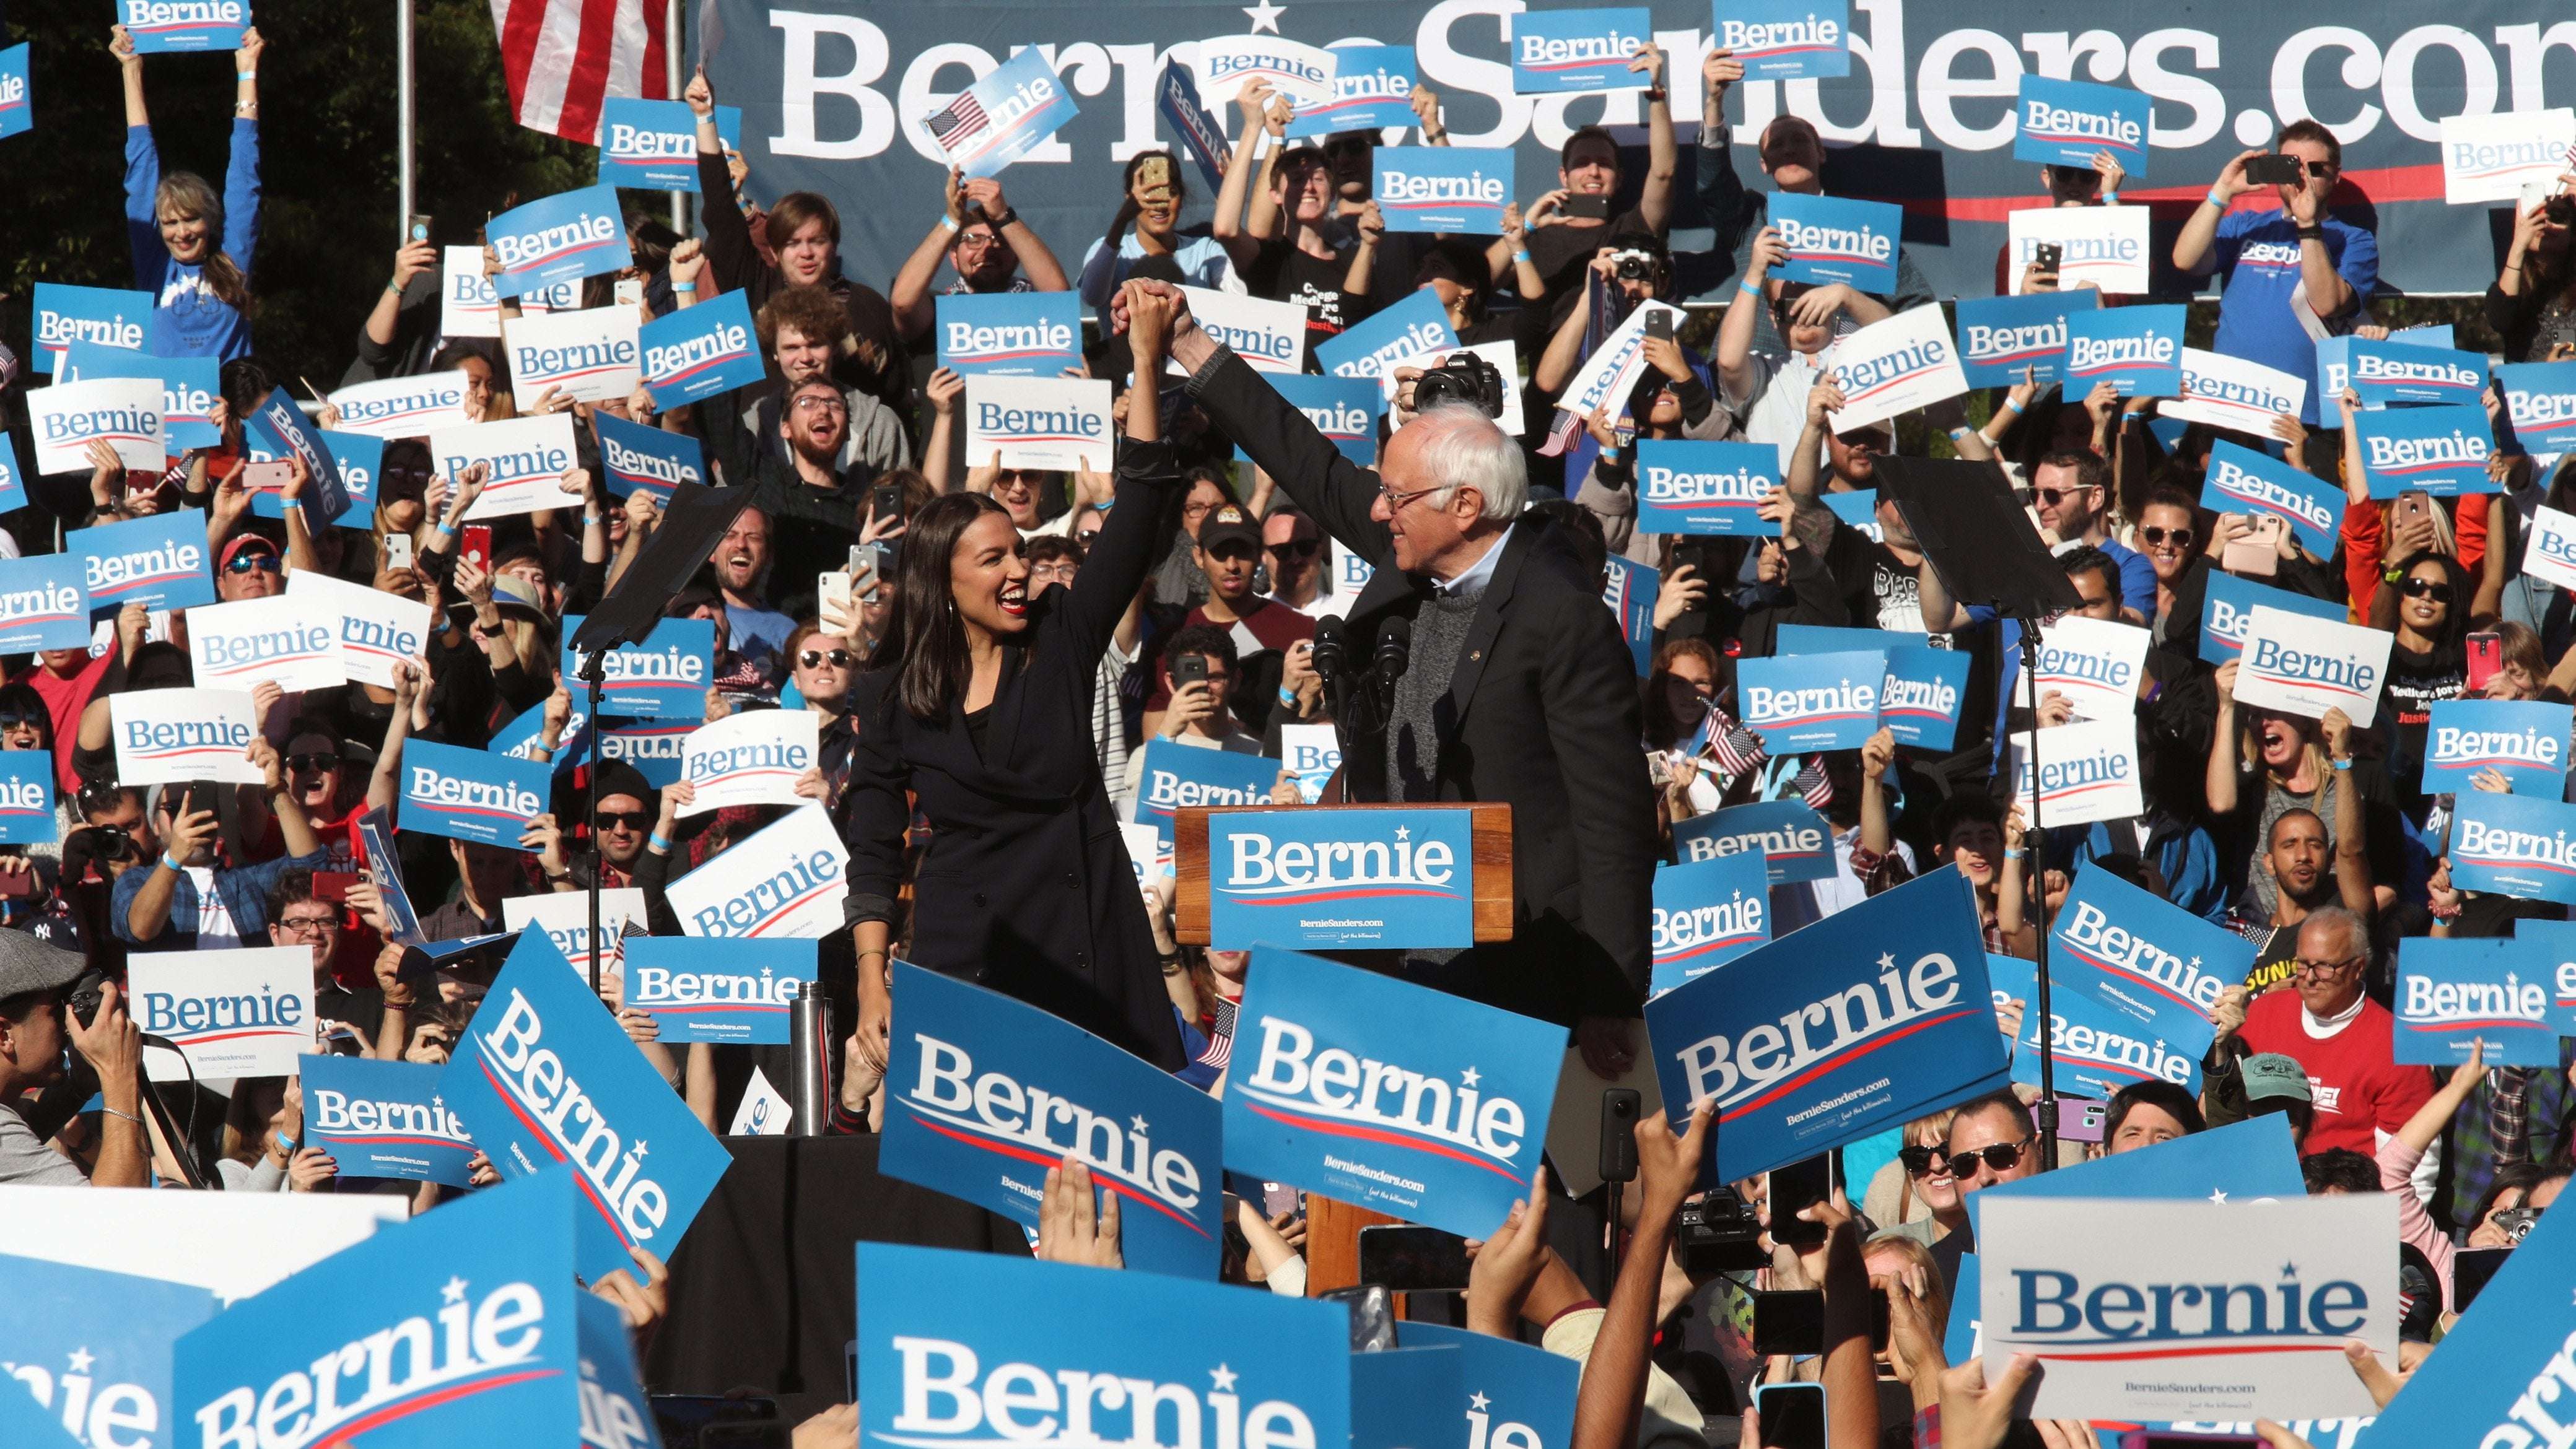 image for 'I am back': Sanders tops Warren with massive New York City rally